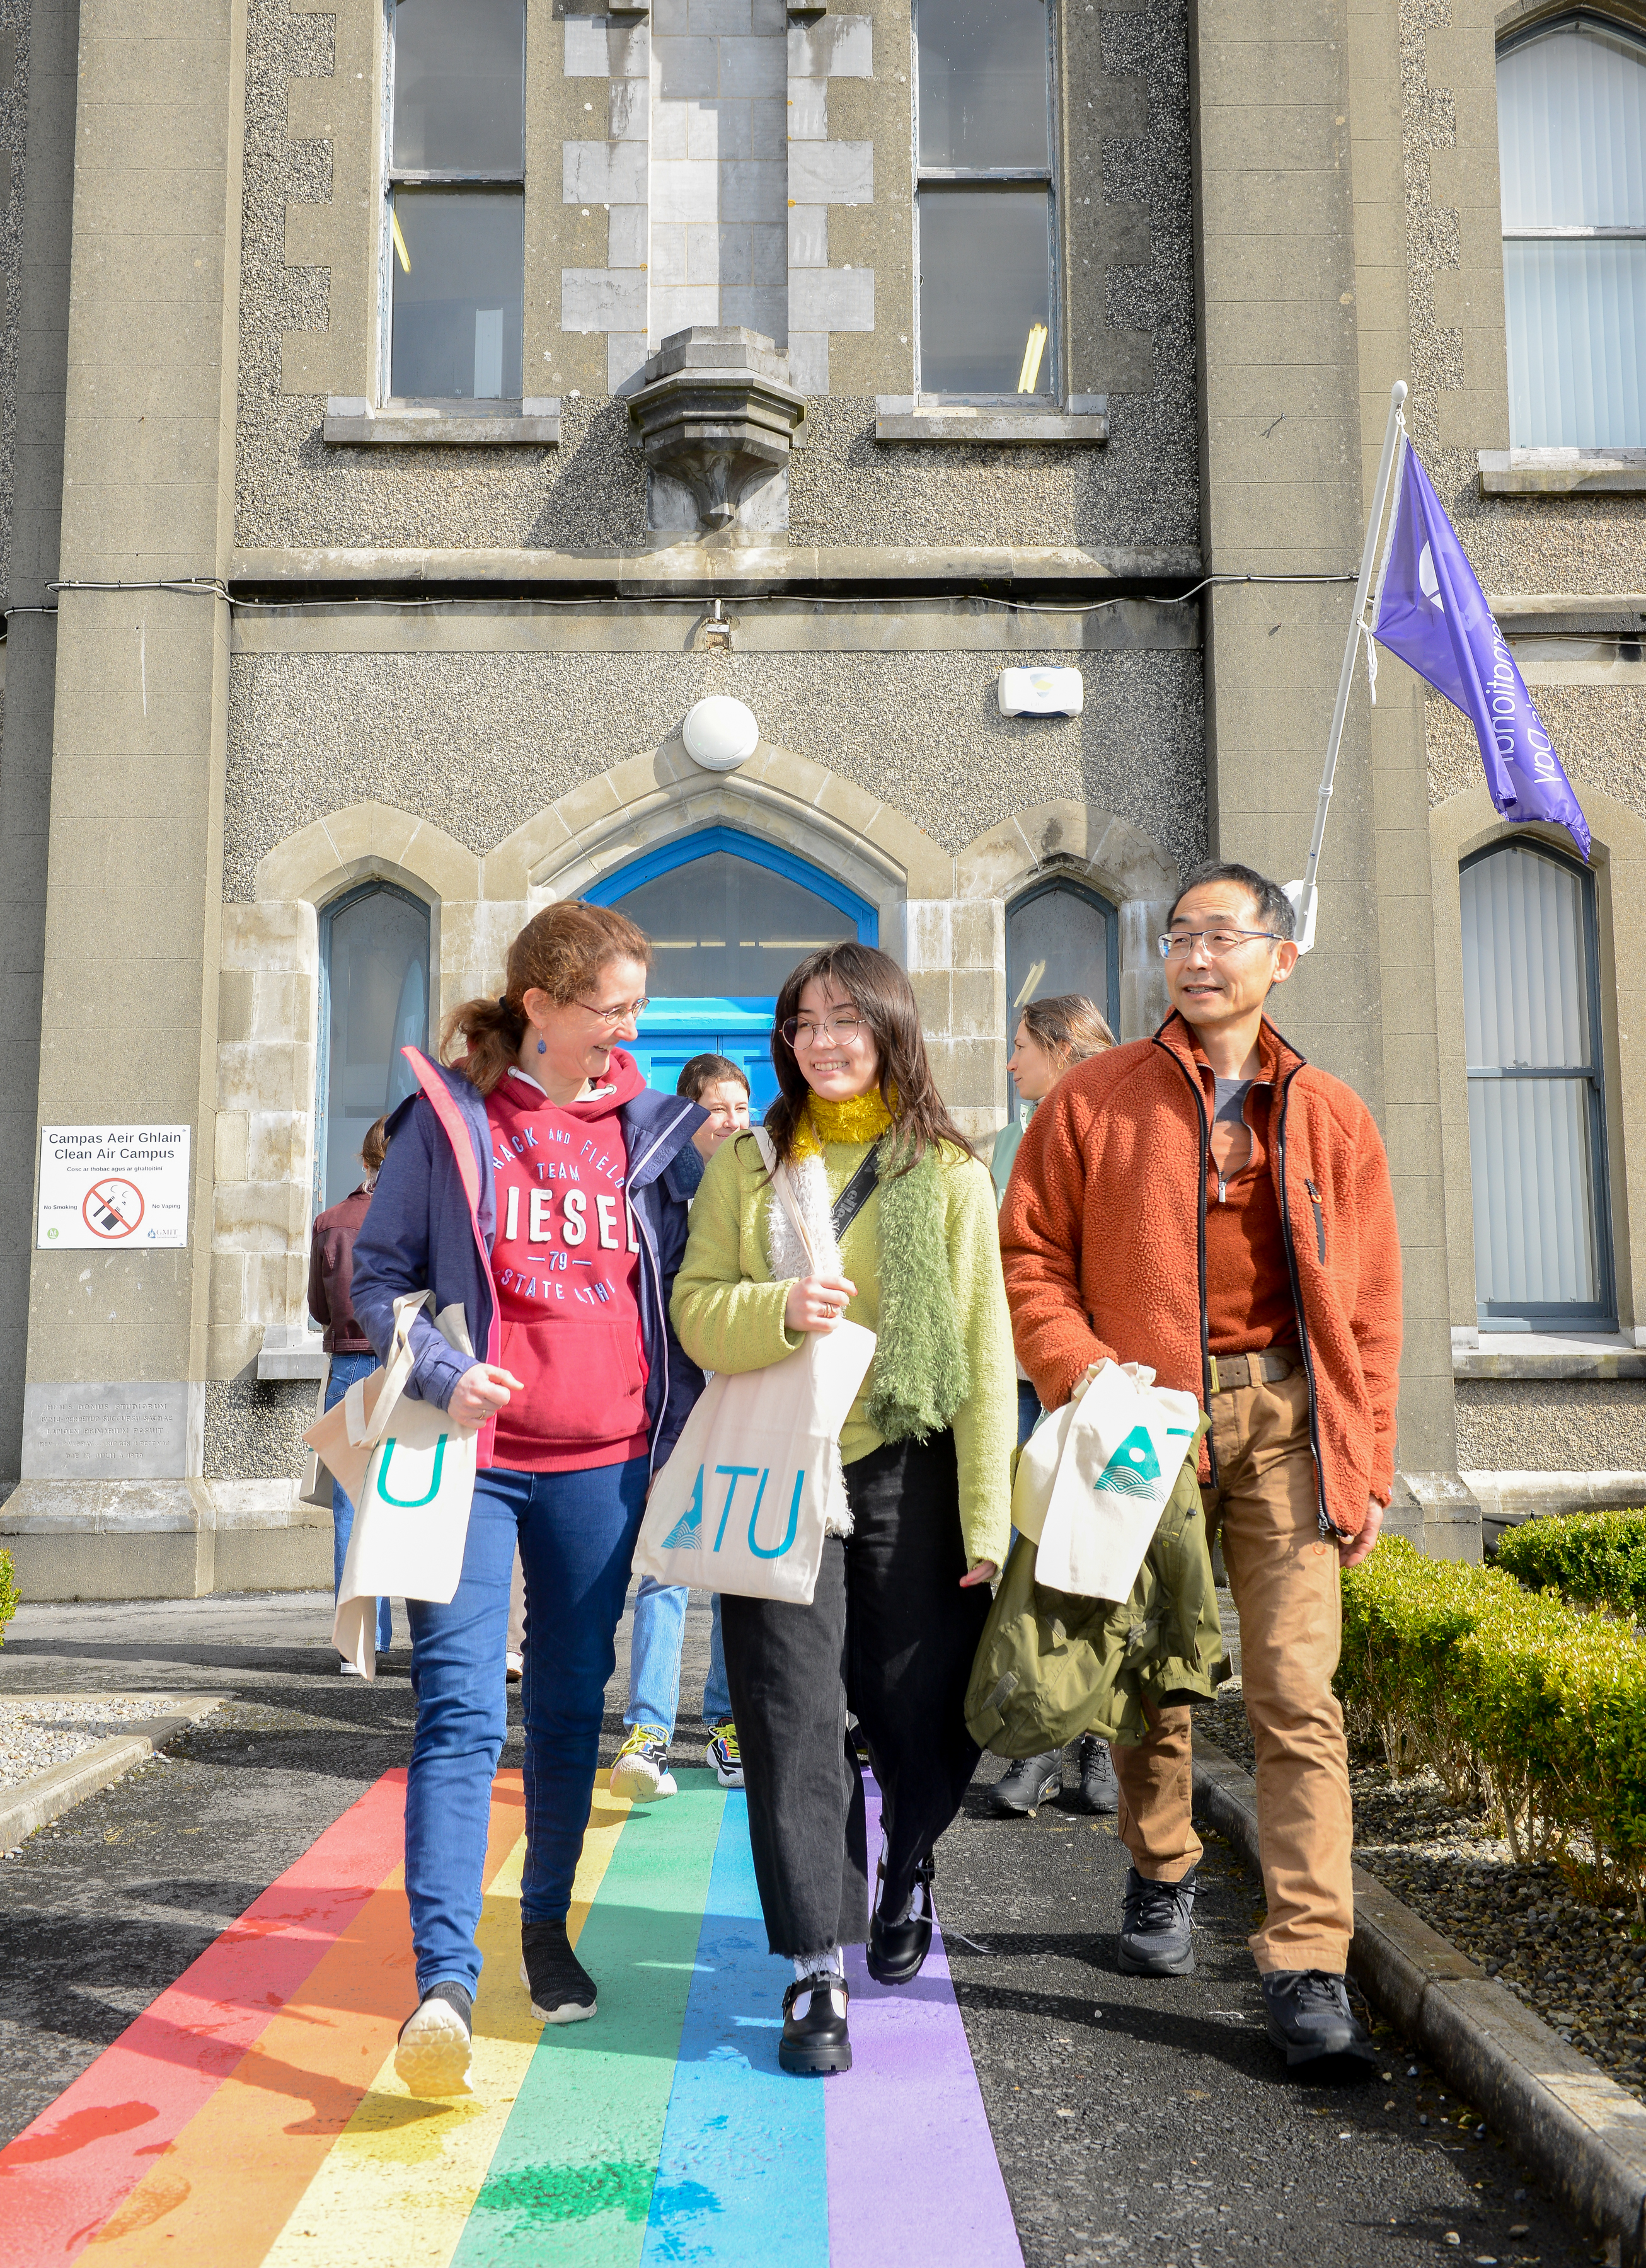 Open Day visitors at ATU Galway City, Wellpark ROad campus